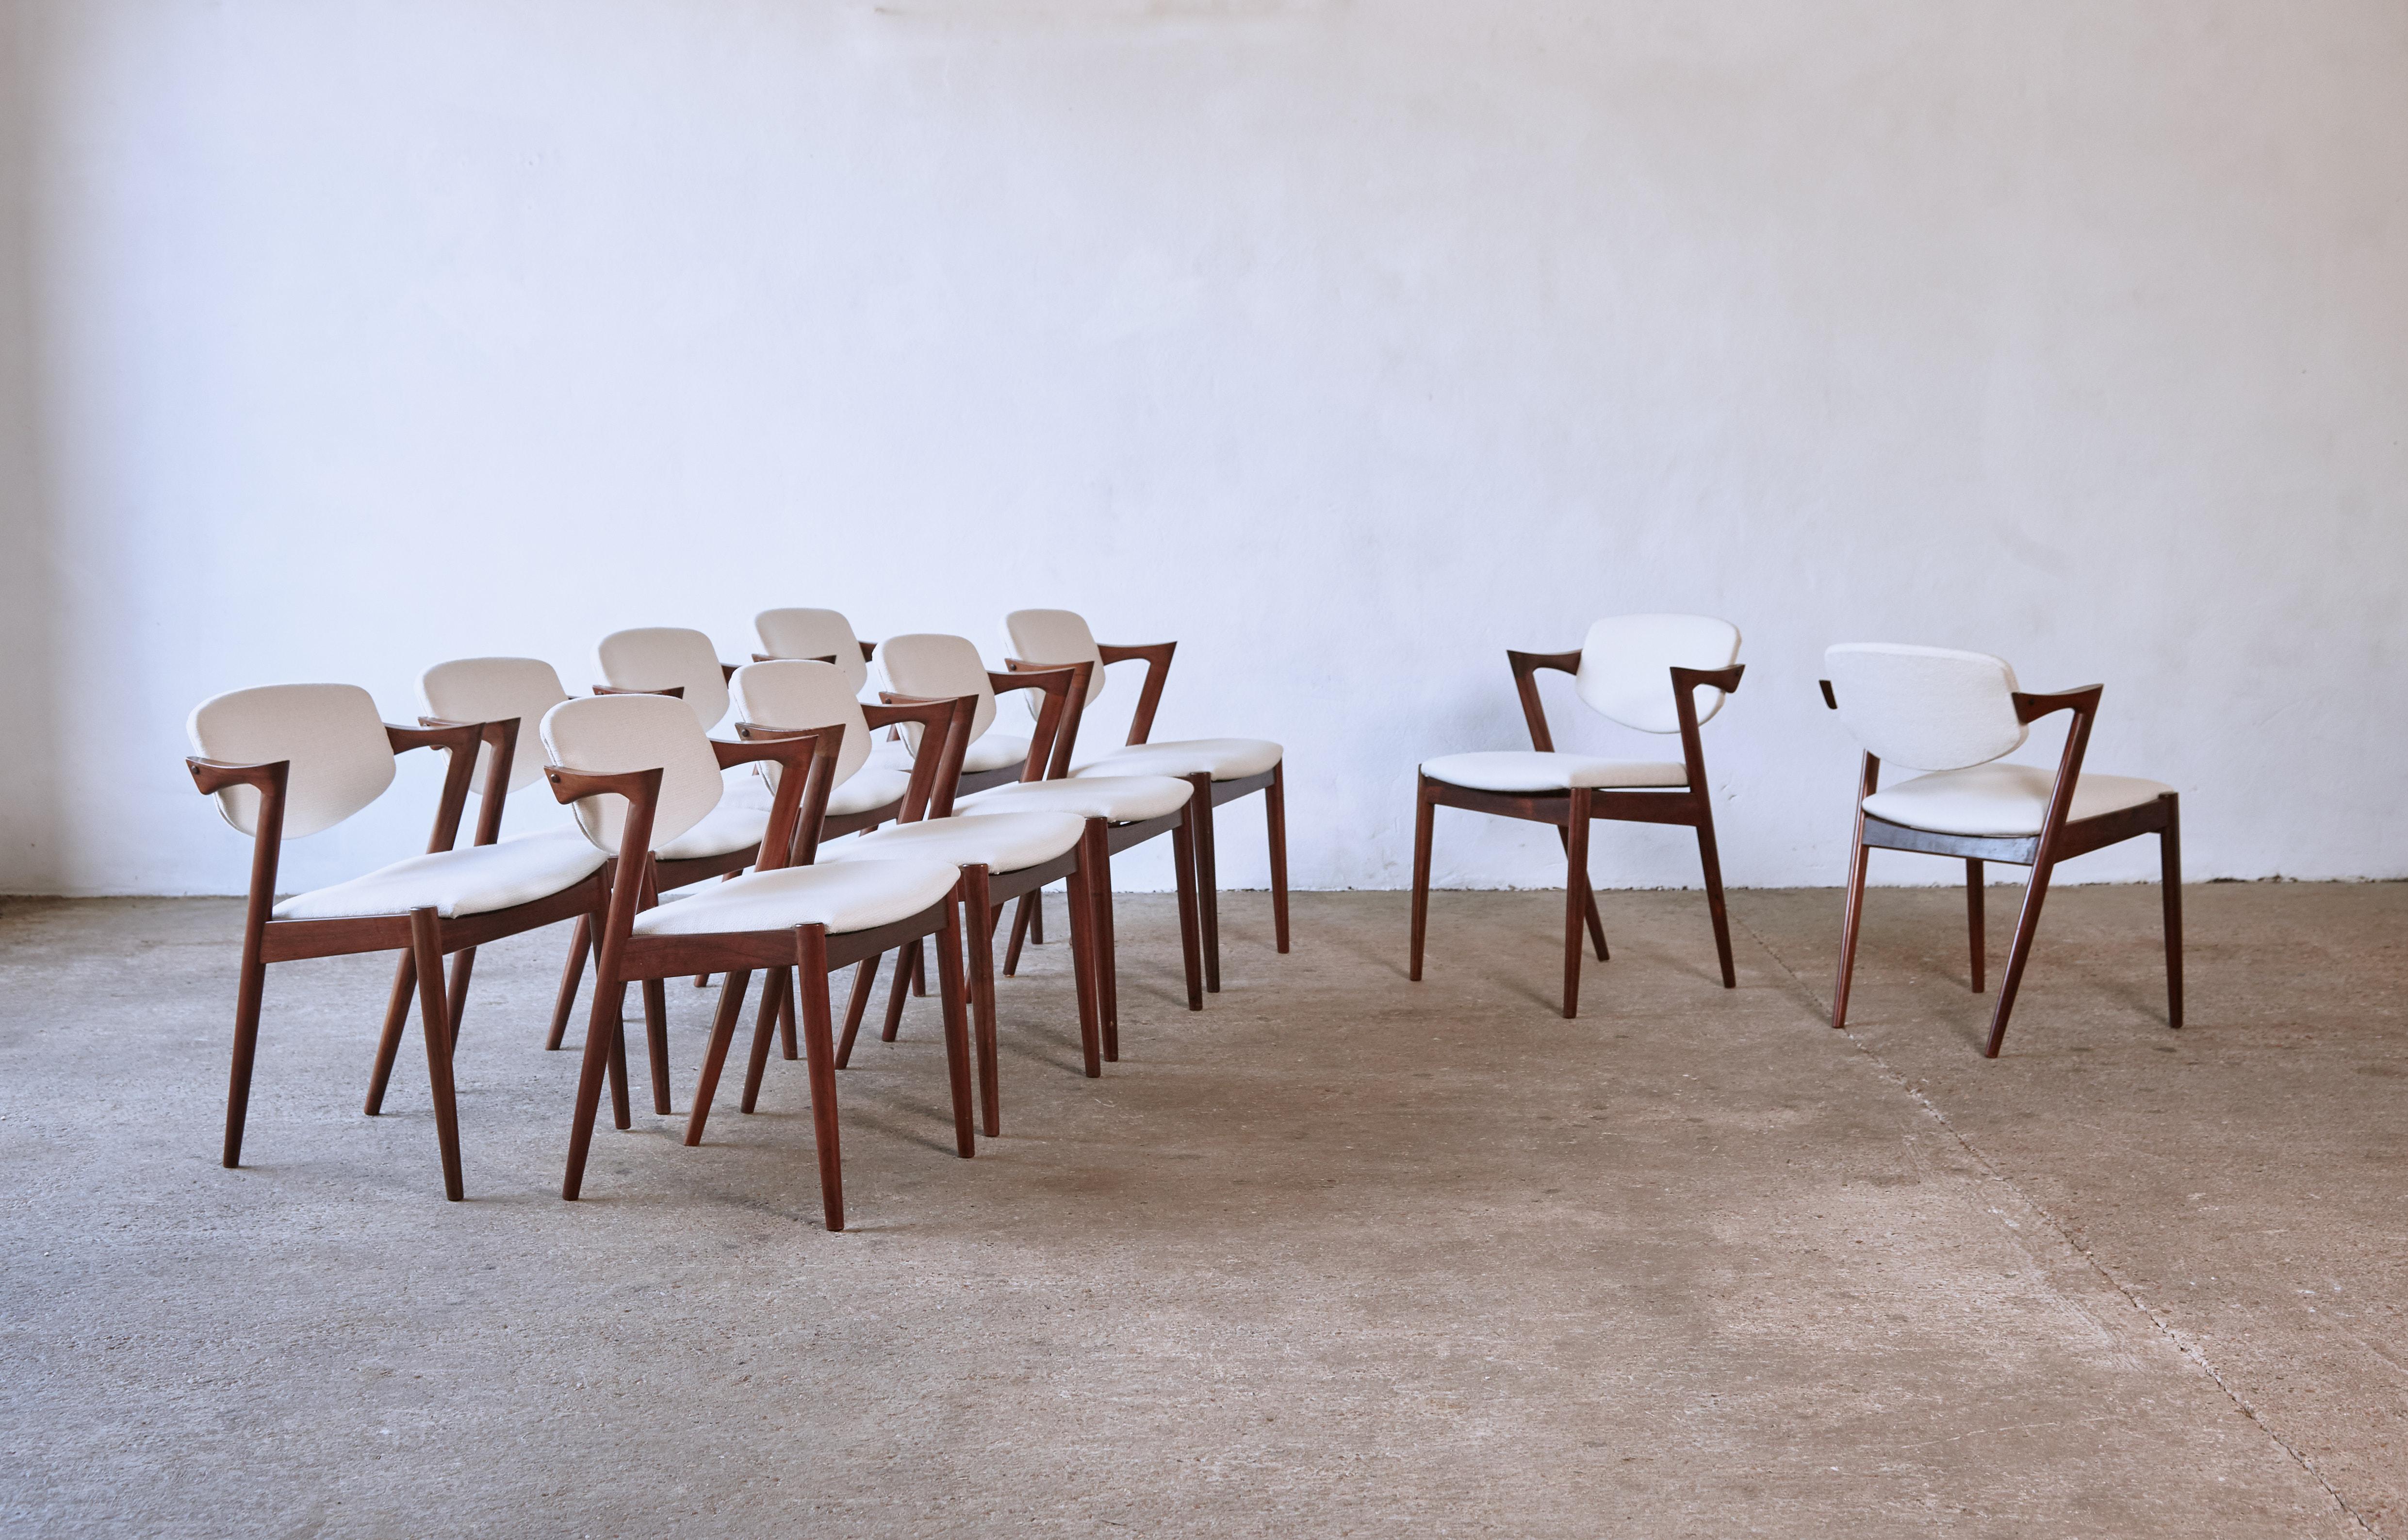 A set of ten (10) Model 42 rosewood dining chairs by Kai Kristiansen for Schou Andersen, Denmark, 1960s. Tilting backrest. Newly reupholstered seats in Larsen / Cowtan and Tout fabric. Very good condition, only one chair shows some wear on the